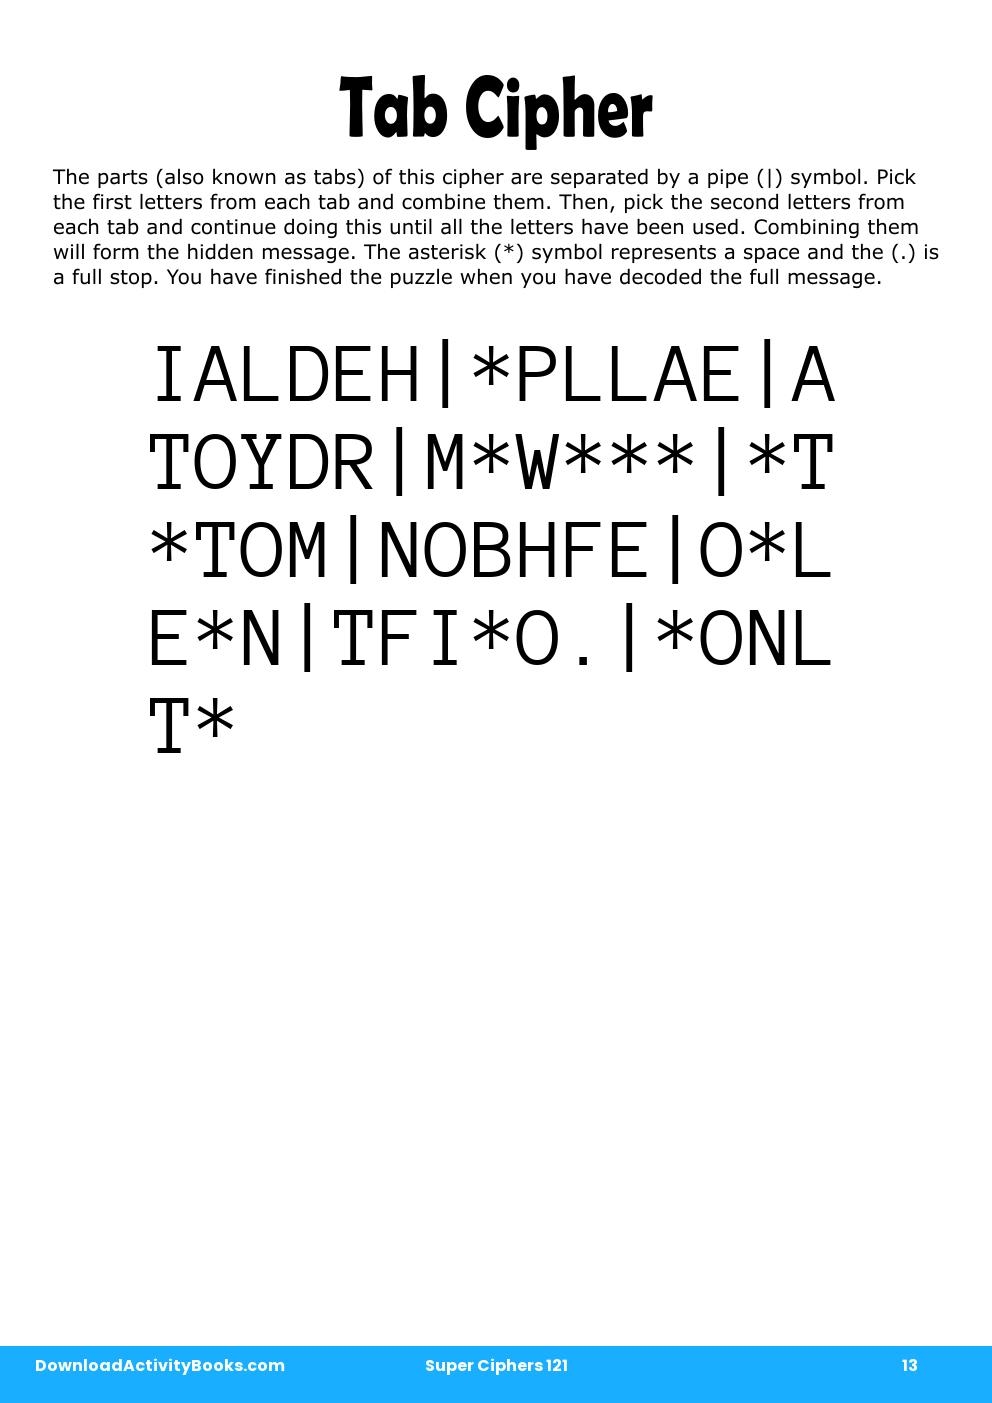 Tab Cipher in Super Ciphers 121